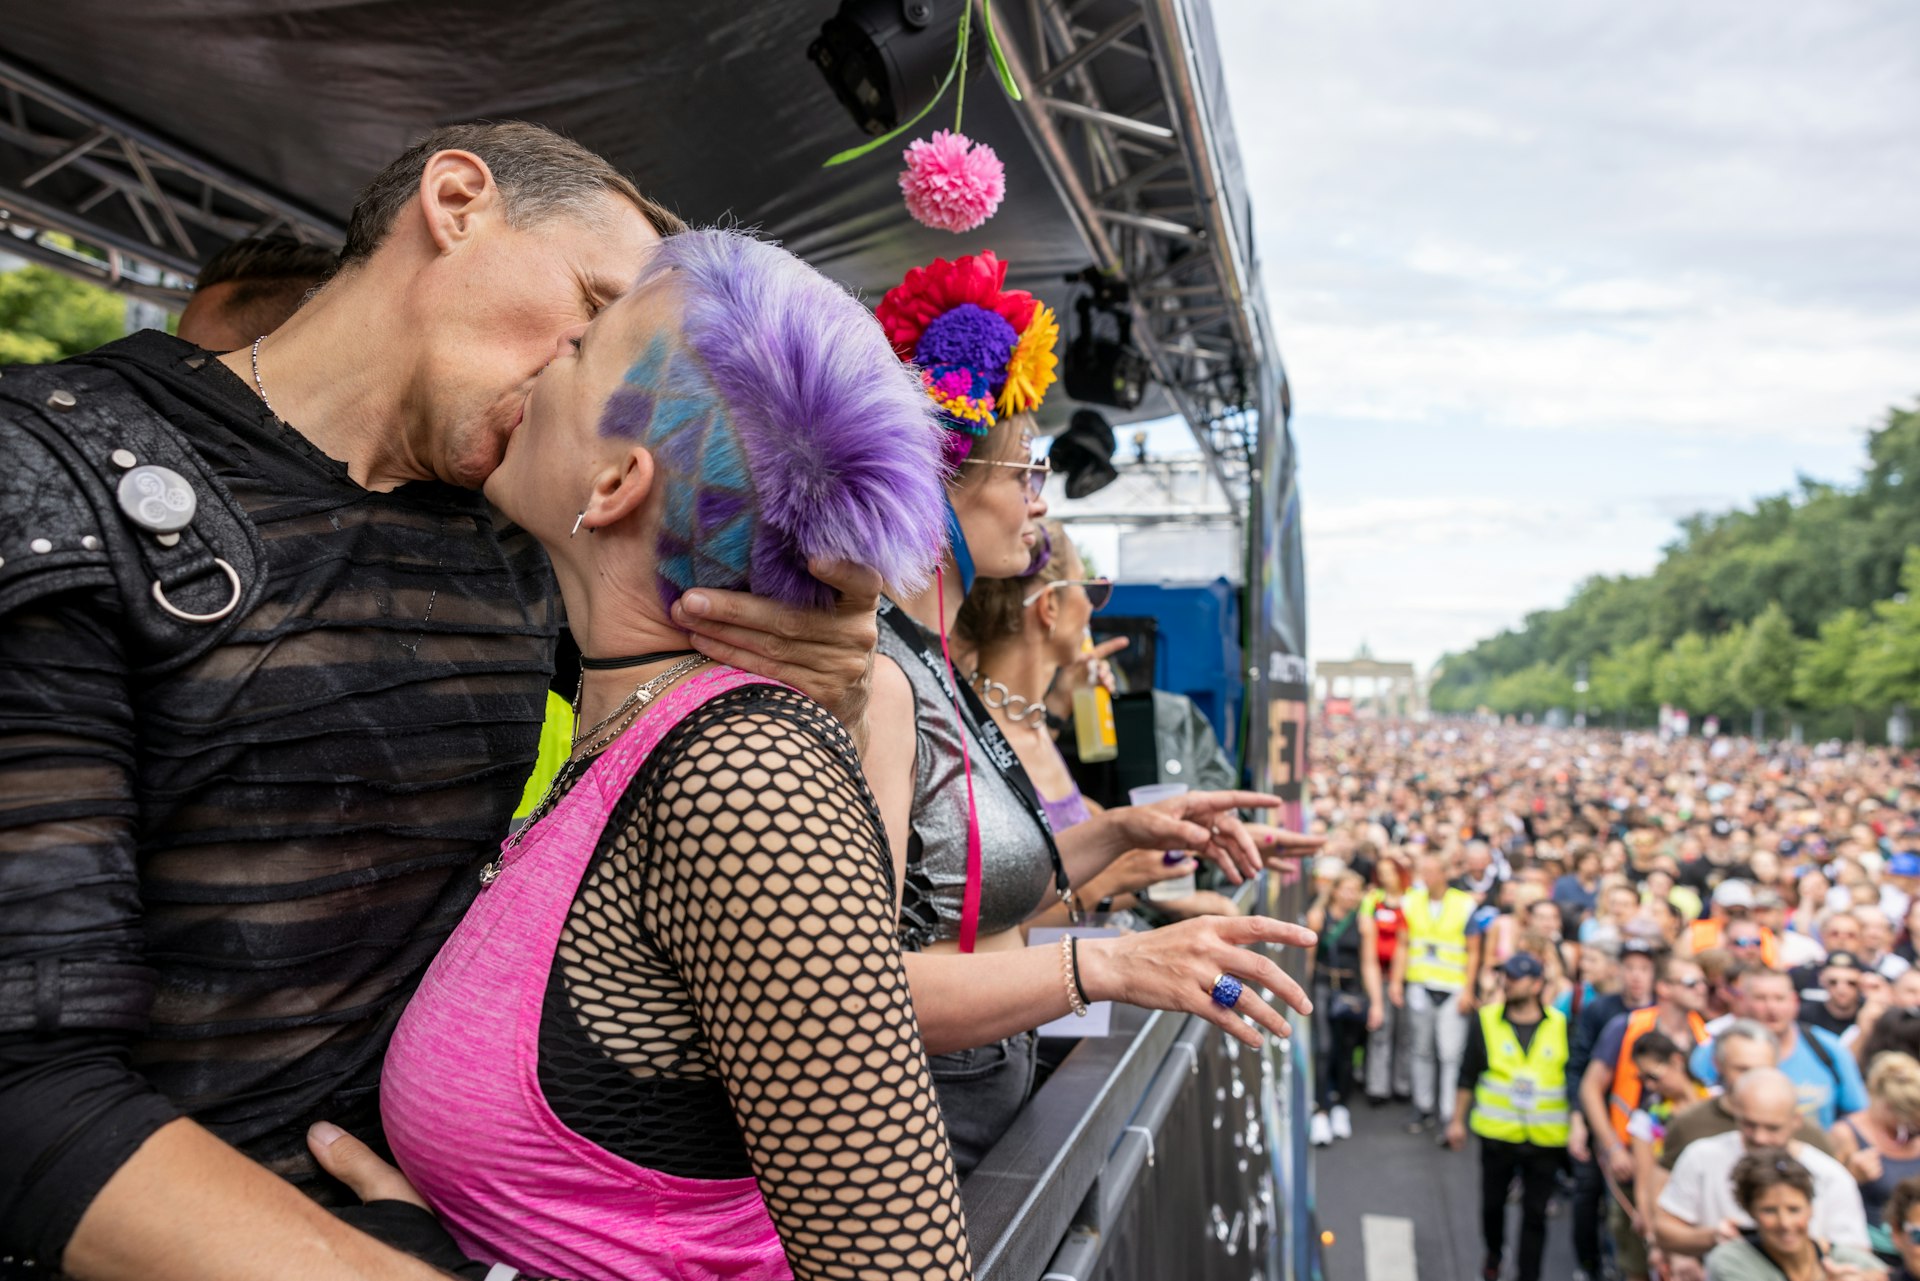 Two techno music enthusiasts kiss on a float at Rave the Planet (Love Parade) 2022, Berlin, Germany